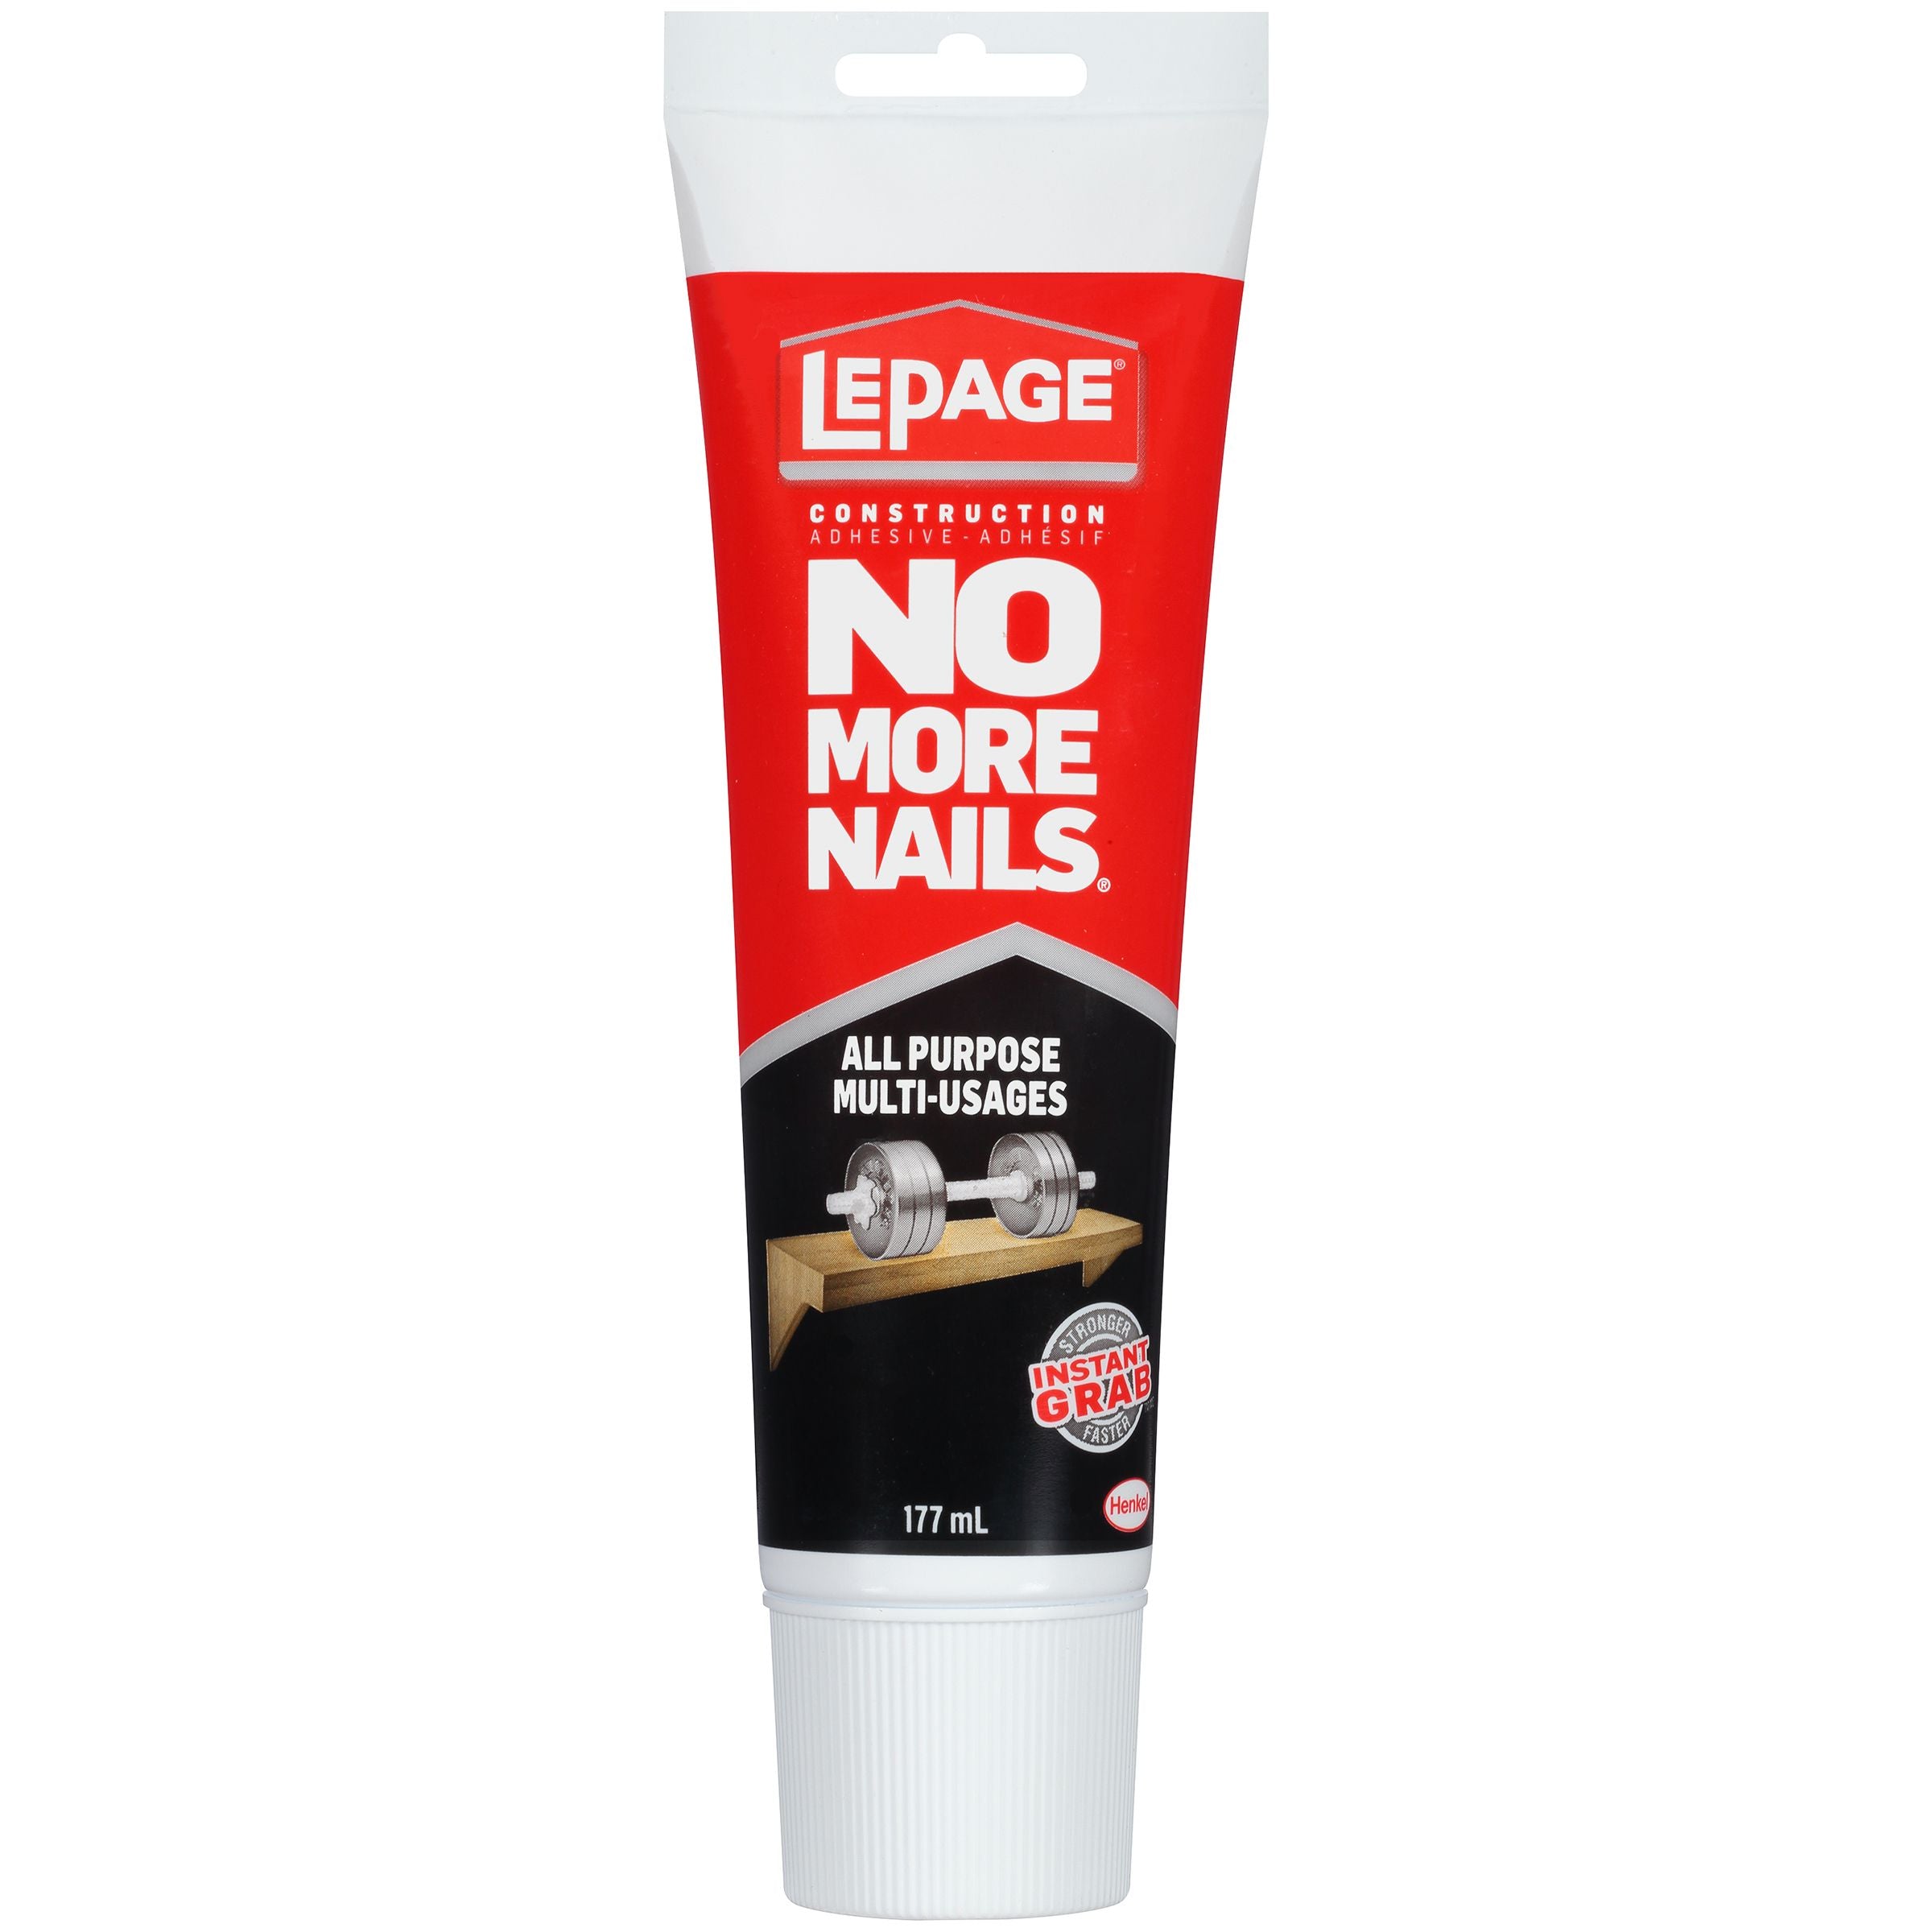 LePage No More Nails All Purpose Construction Adhesive, White, 177 ml Tube, Pack of 1